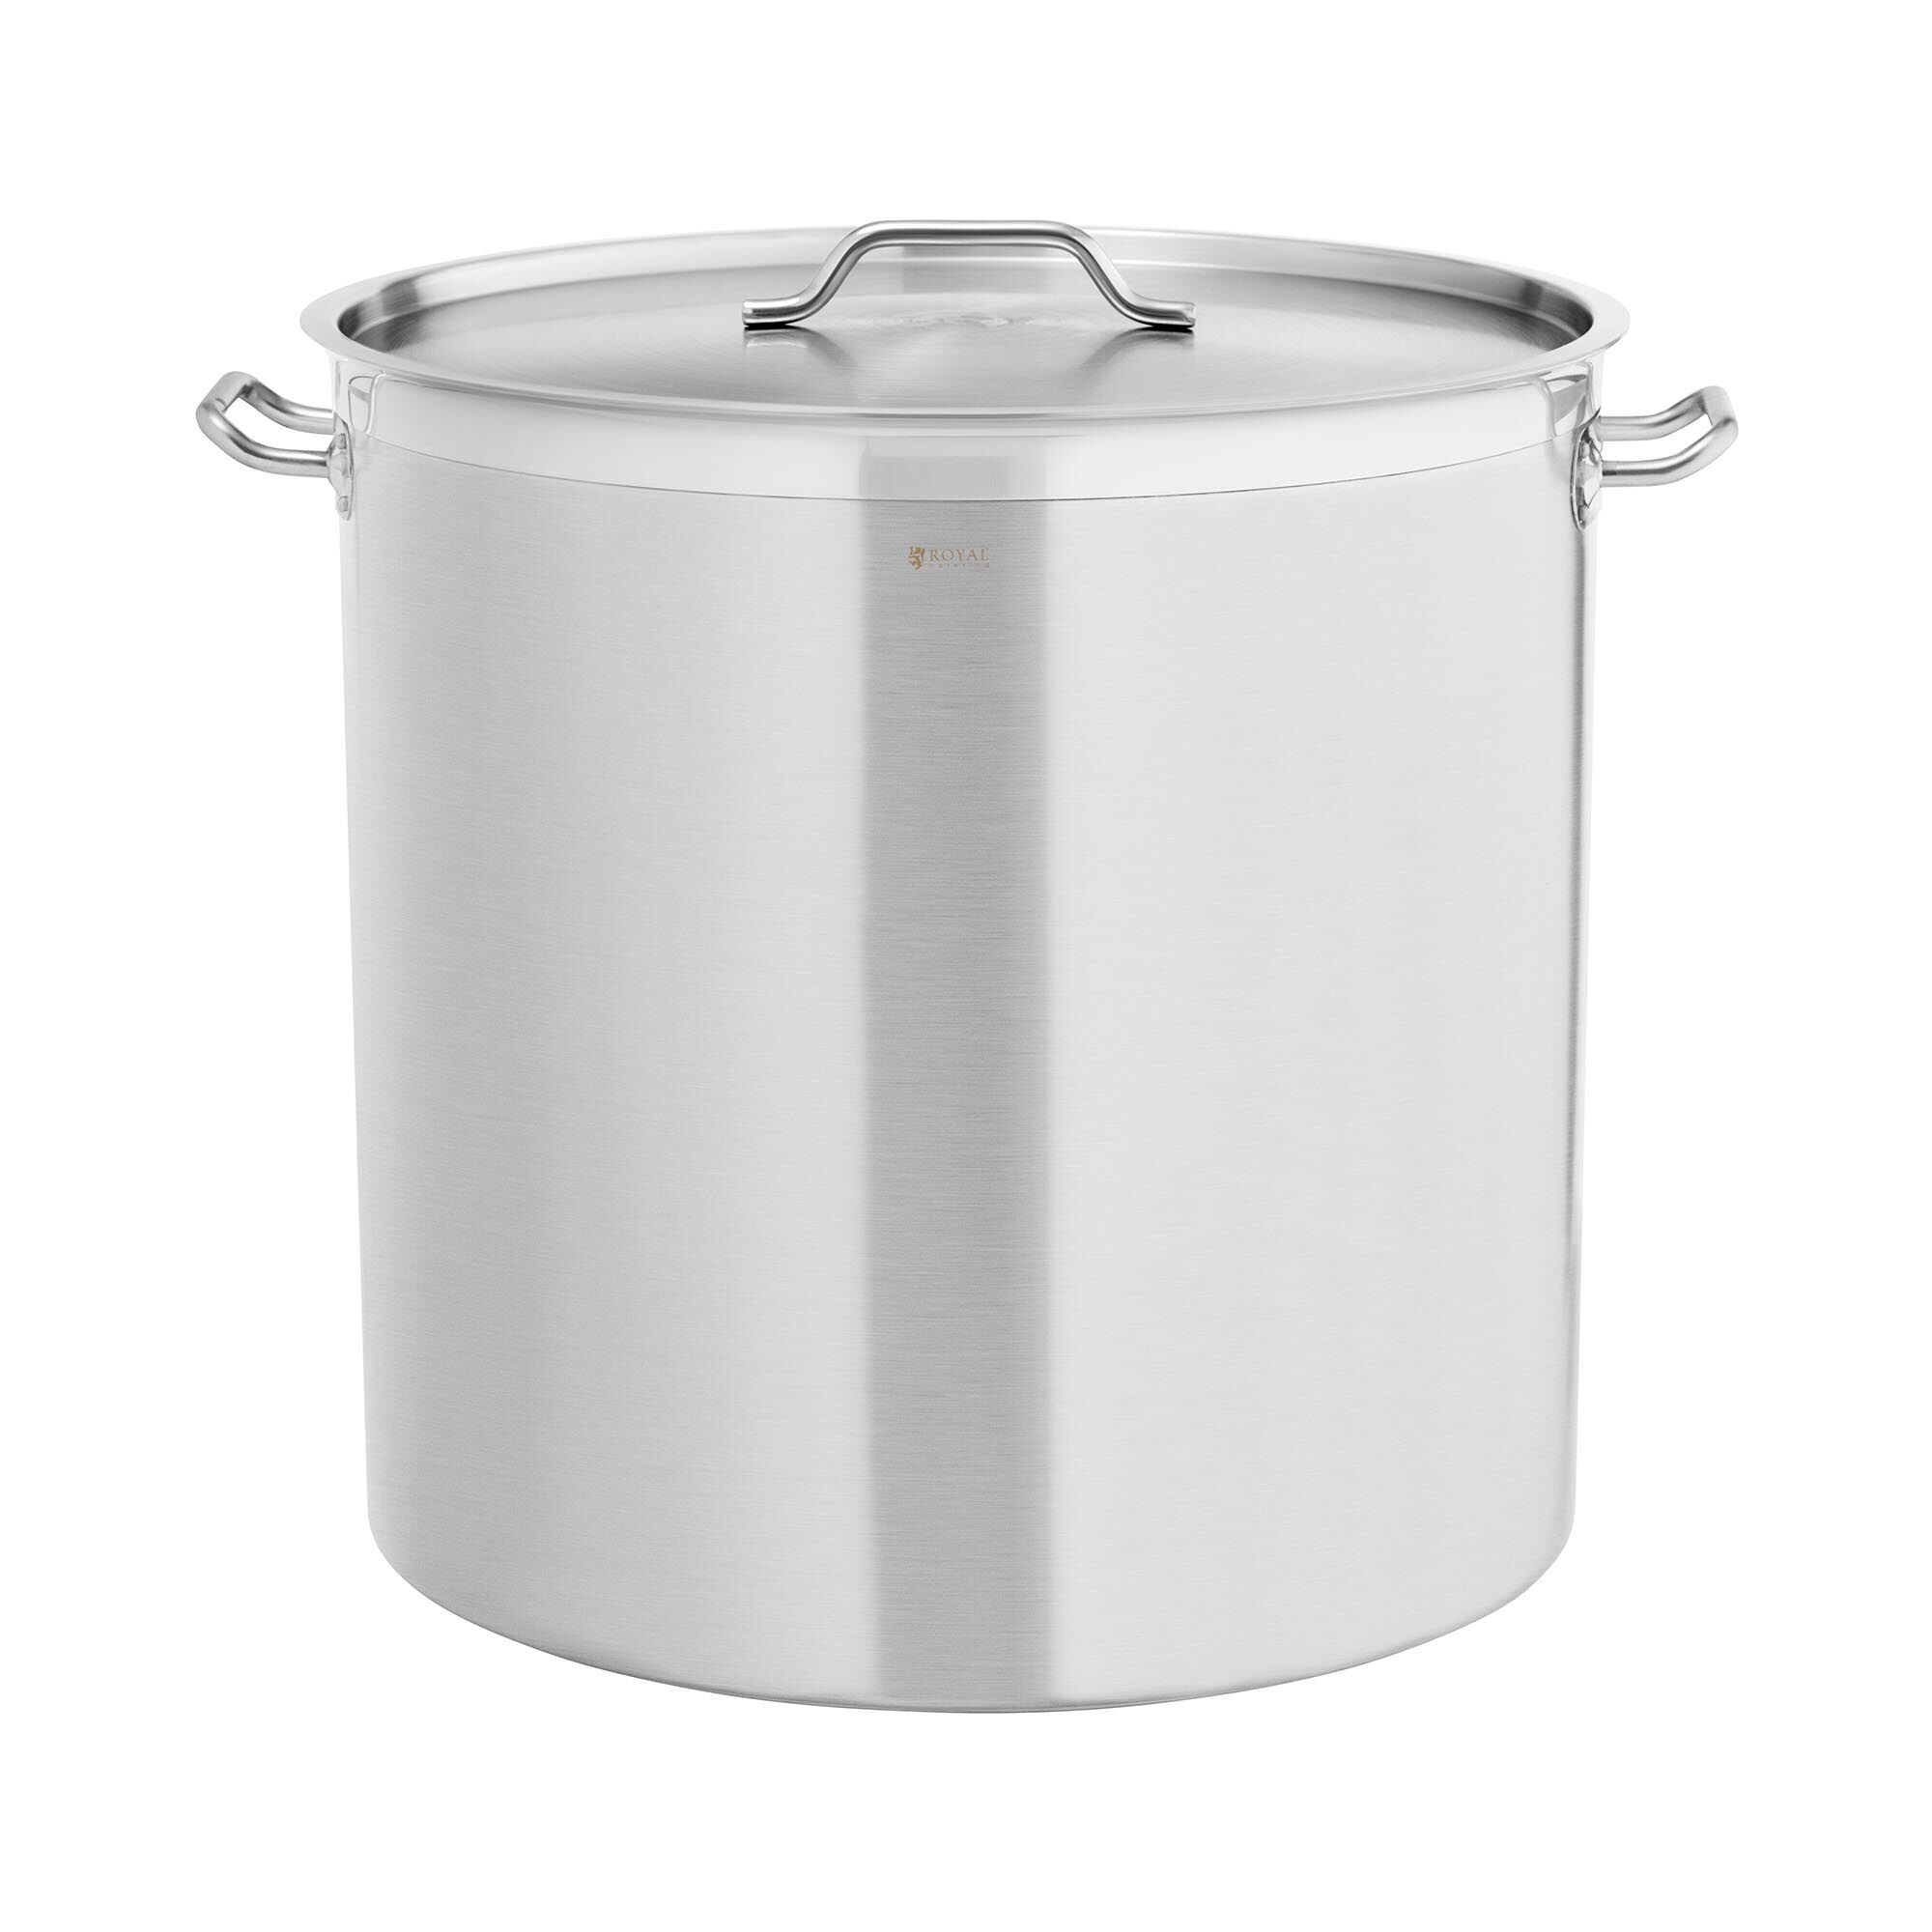 Royal Catering Induction Cooking Pot - 130 L - Royal Catering